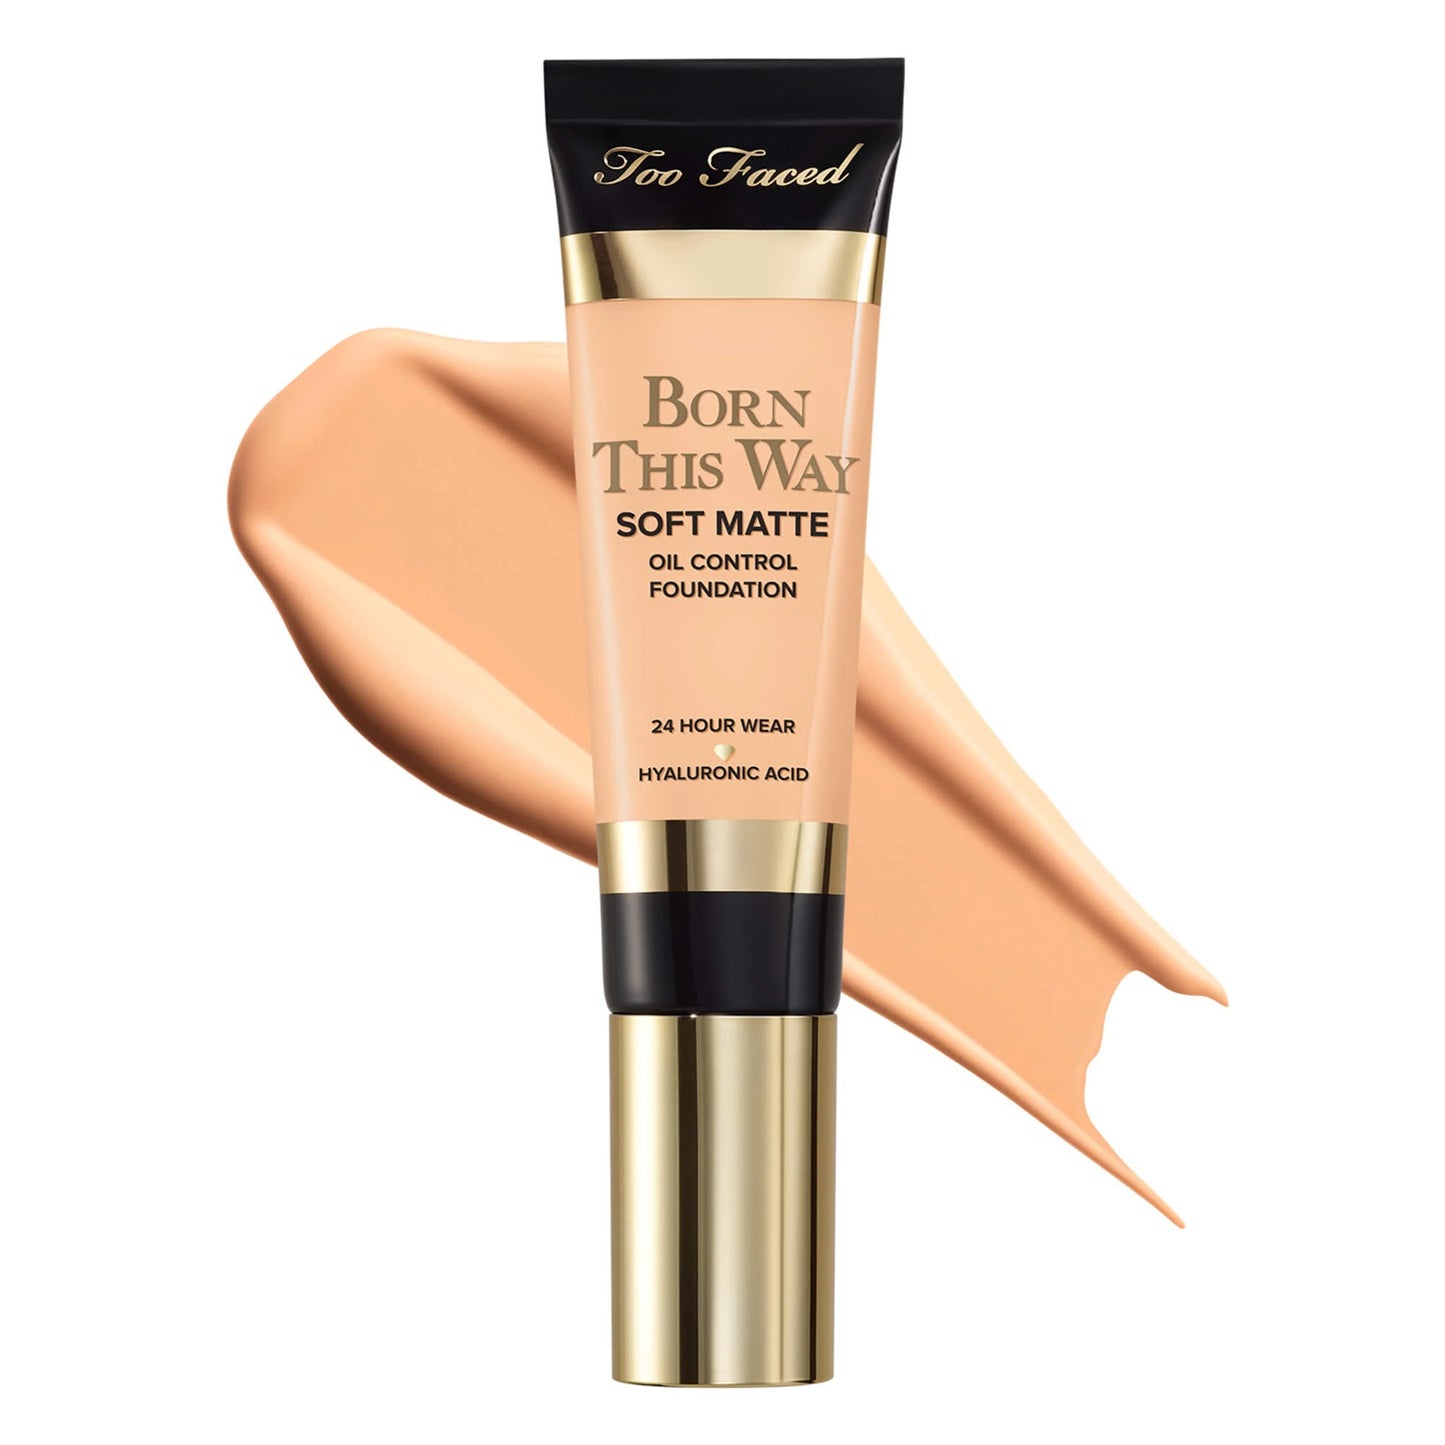 Too Faced Born This Way Soft Matte Foundation 30ml - Almond